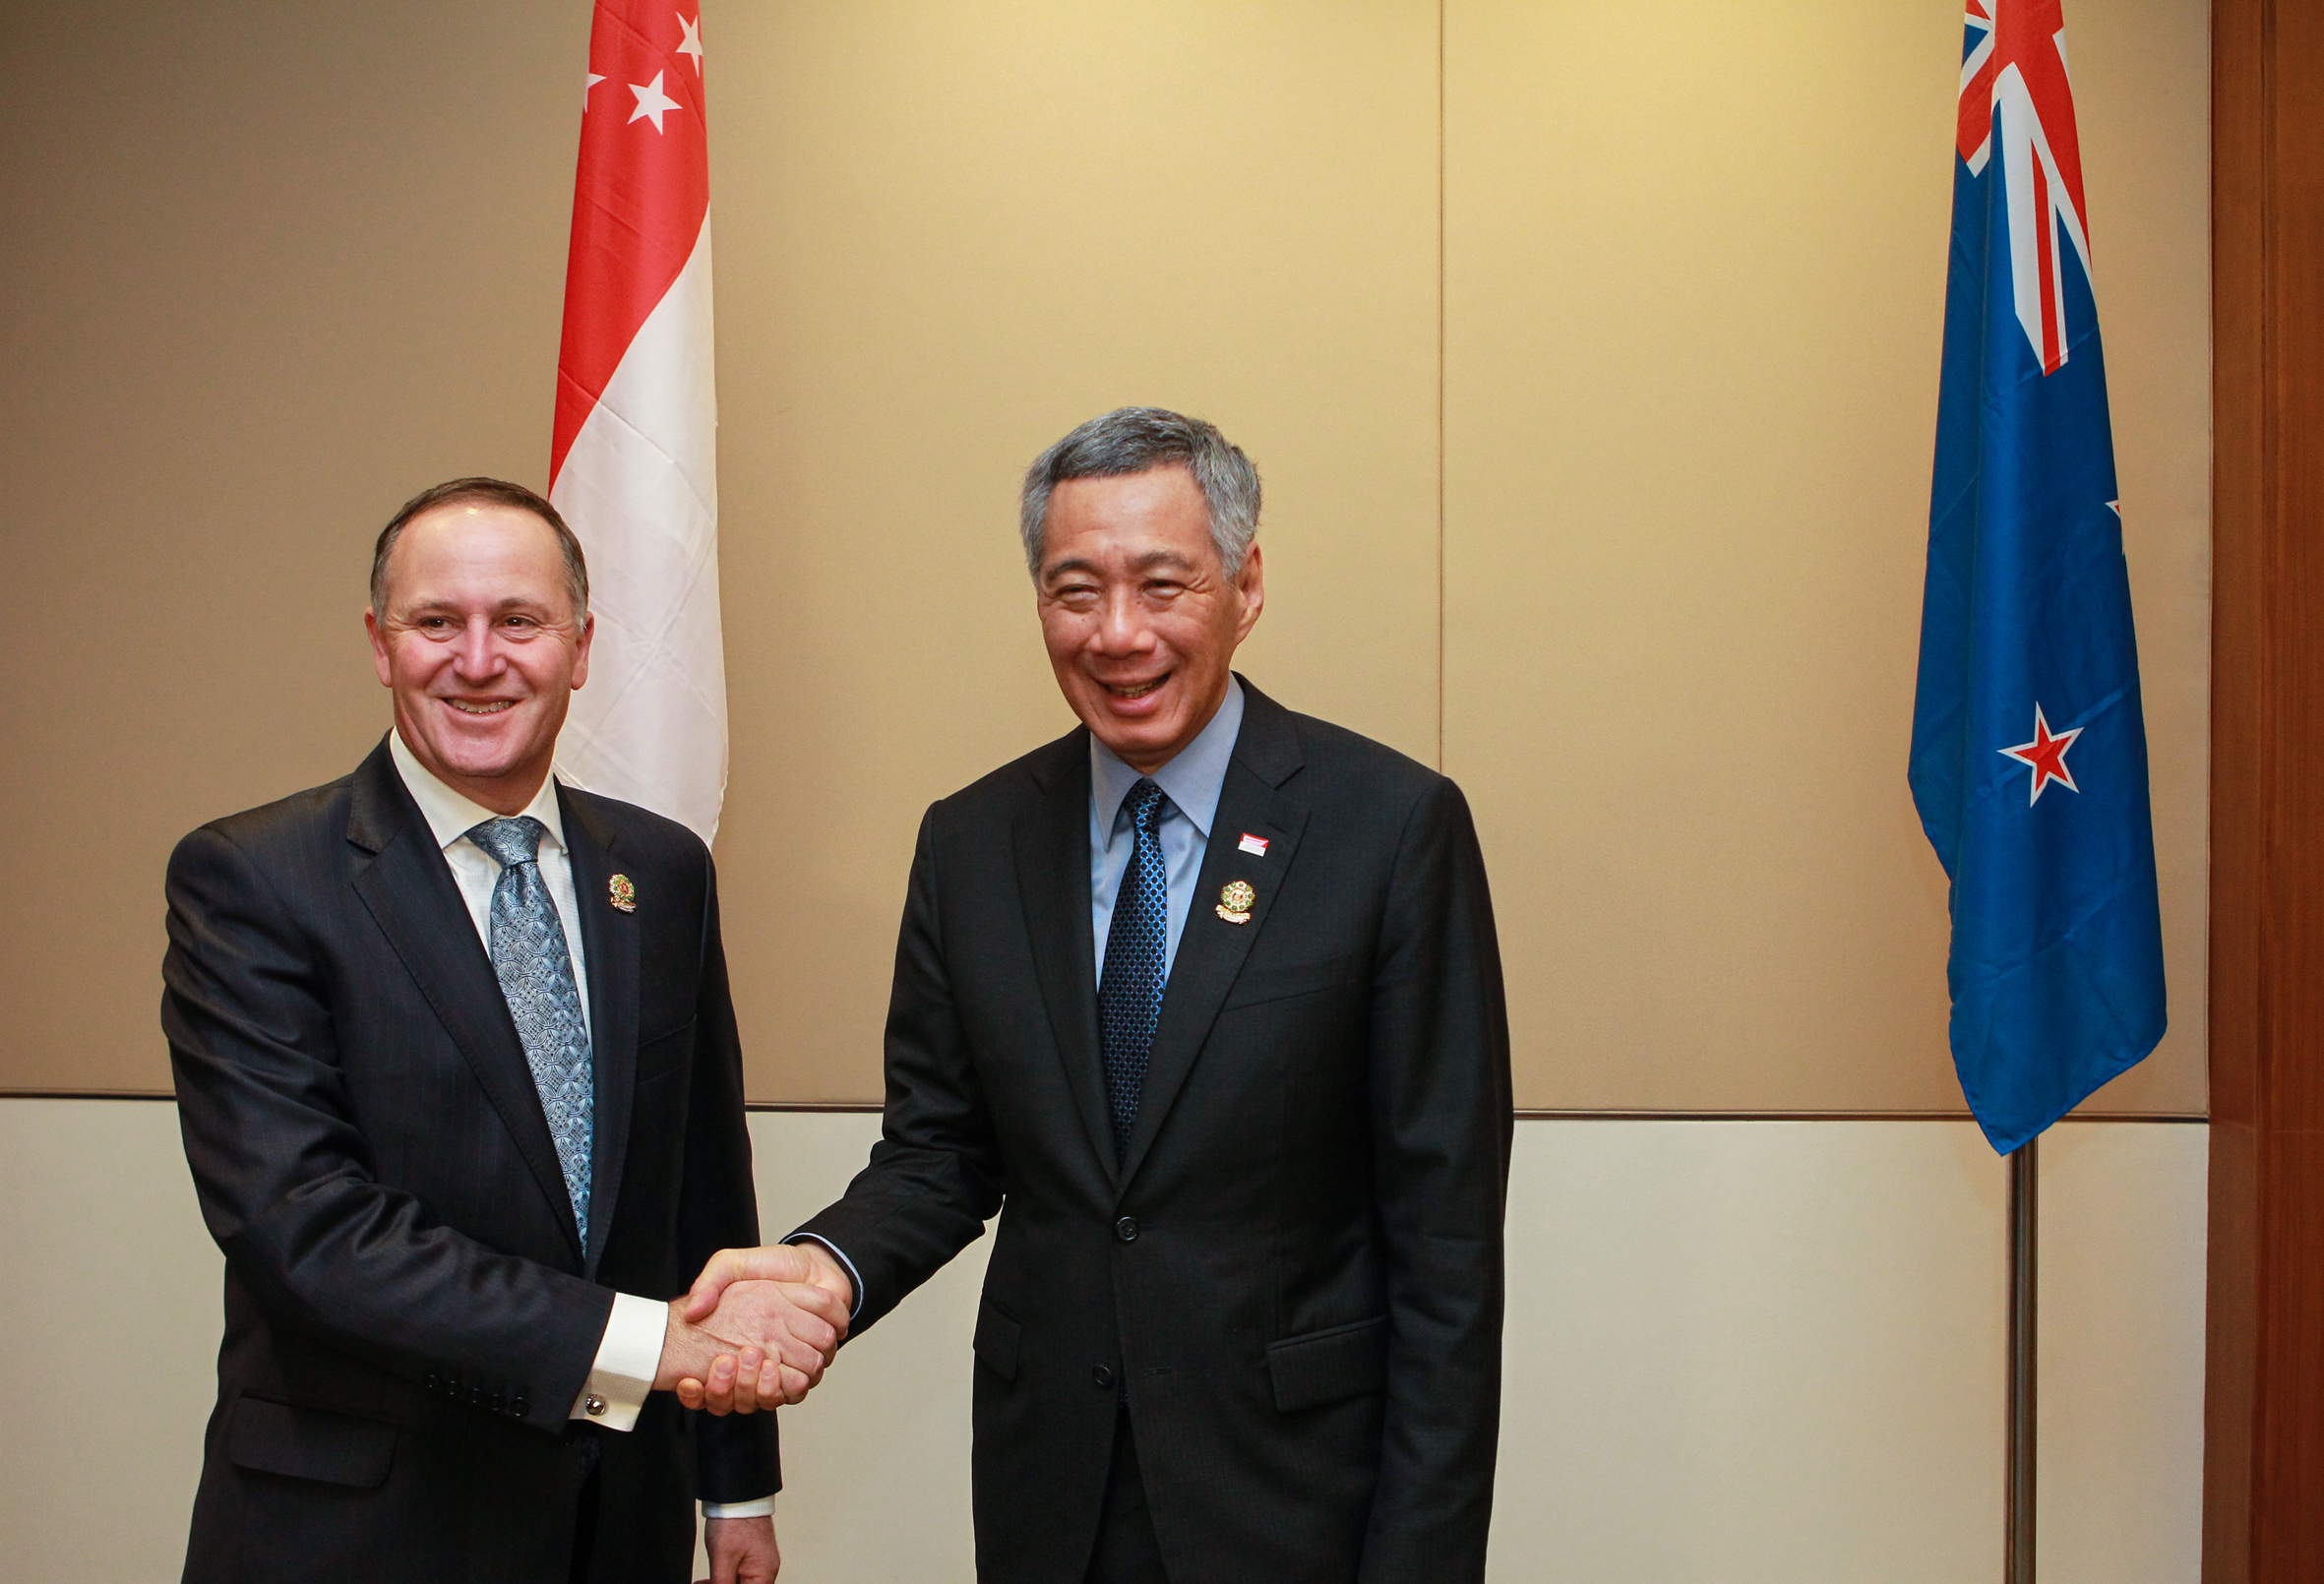 Prime Minister Lee Hsien Loong meeting NZ Prime Minister John Key at the 25th ASEAN Summit in Nay Pyi Taw, Myanmar from 12 to 13 Nov 2014 (Zaobao Photos © Singapore Press Holdings Limited)